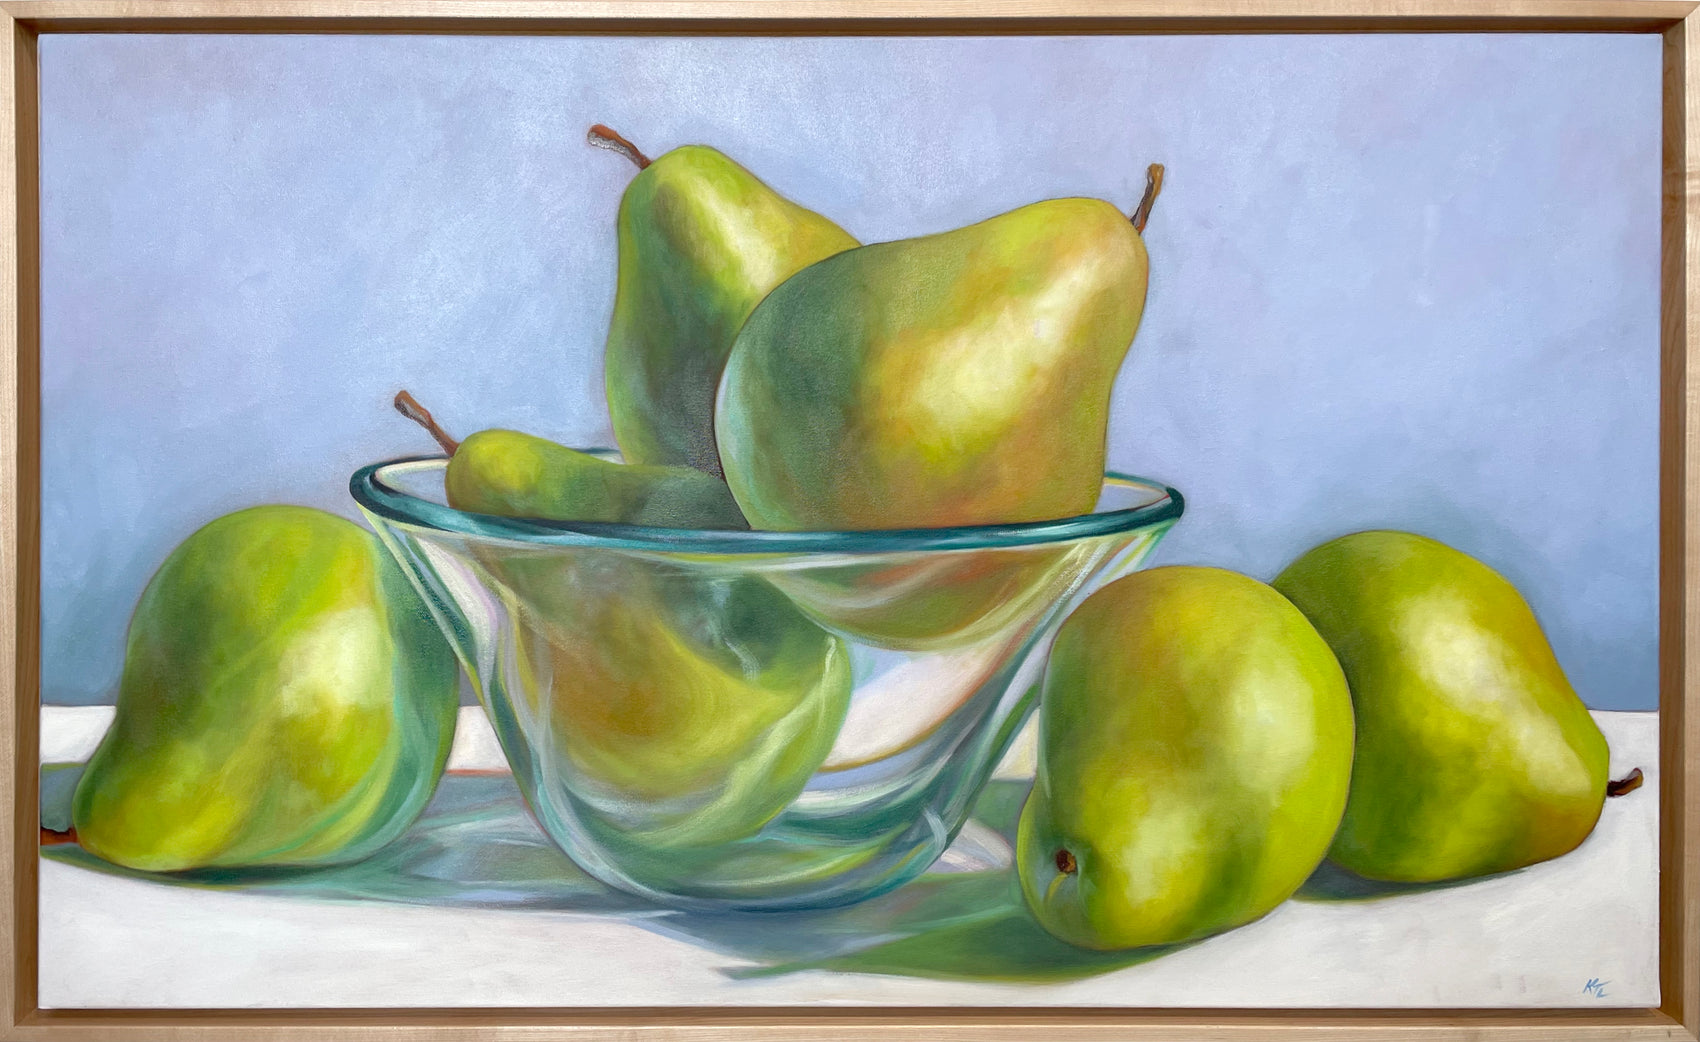 Pears in Glass Bowl